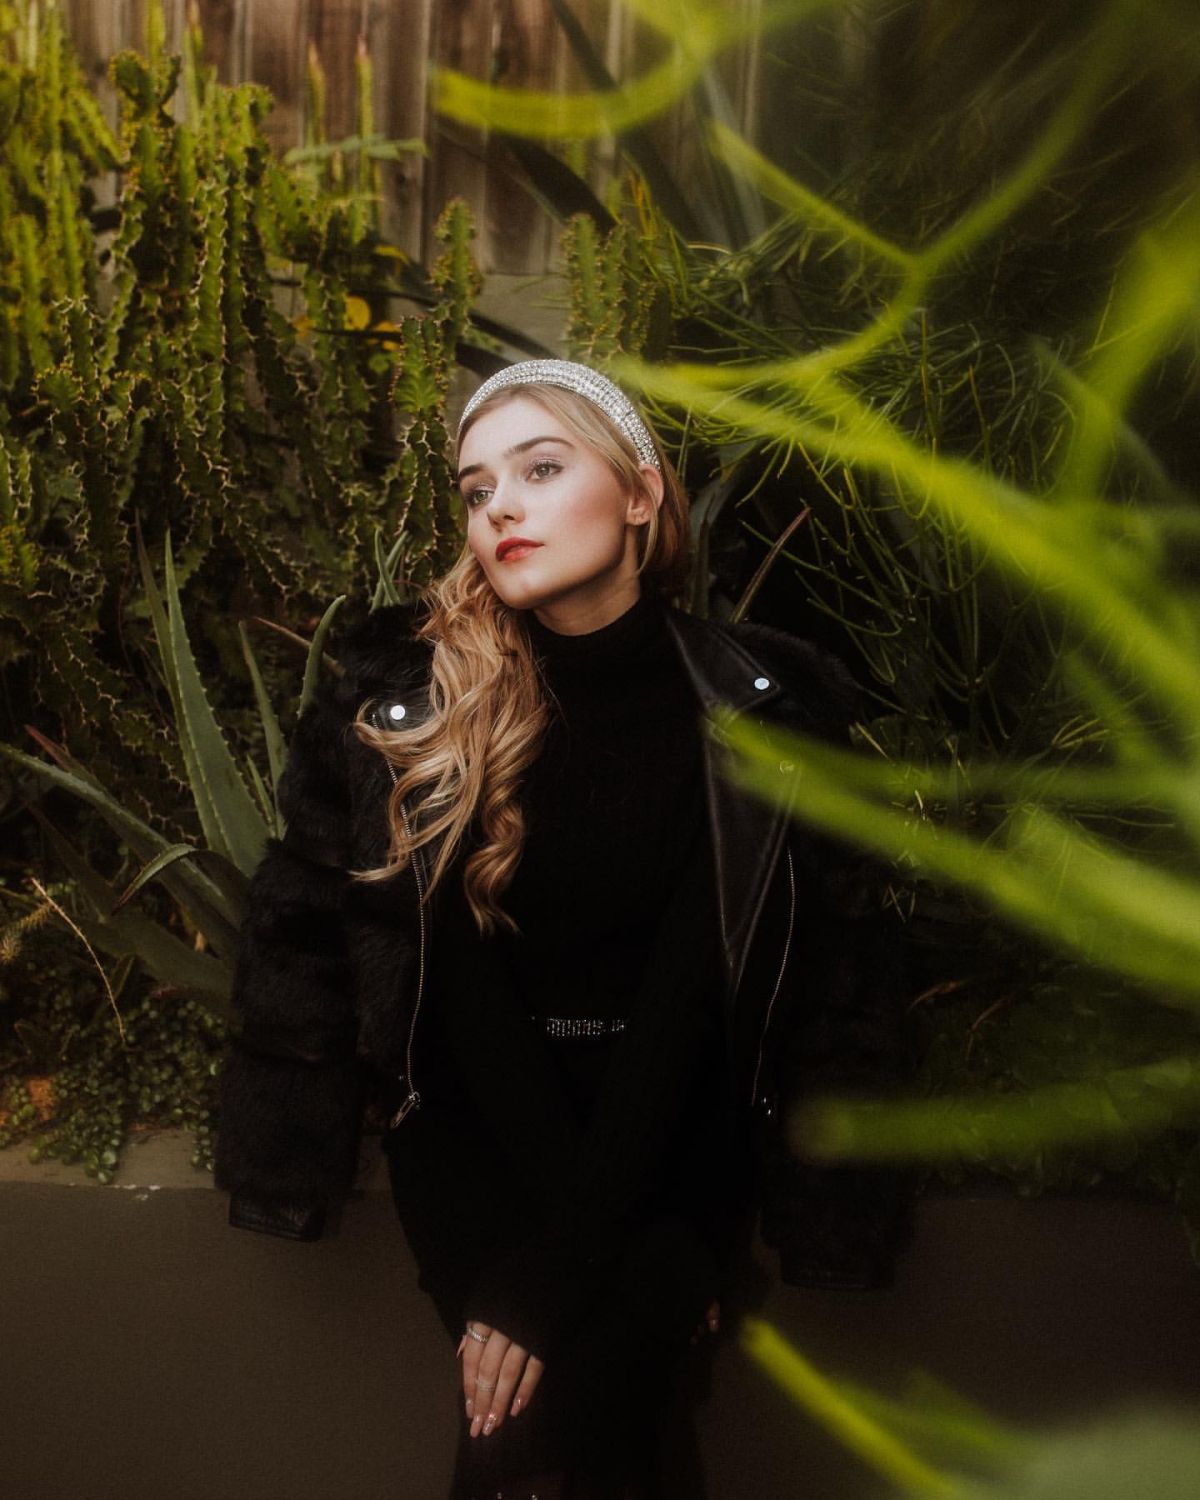 Meg Donnelly photo 155 of 0 pics, wallpaper - photo #1198001 - ThePlace2